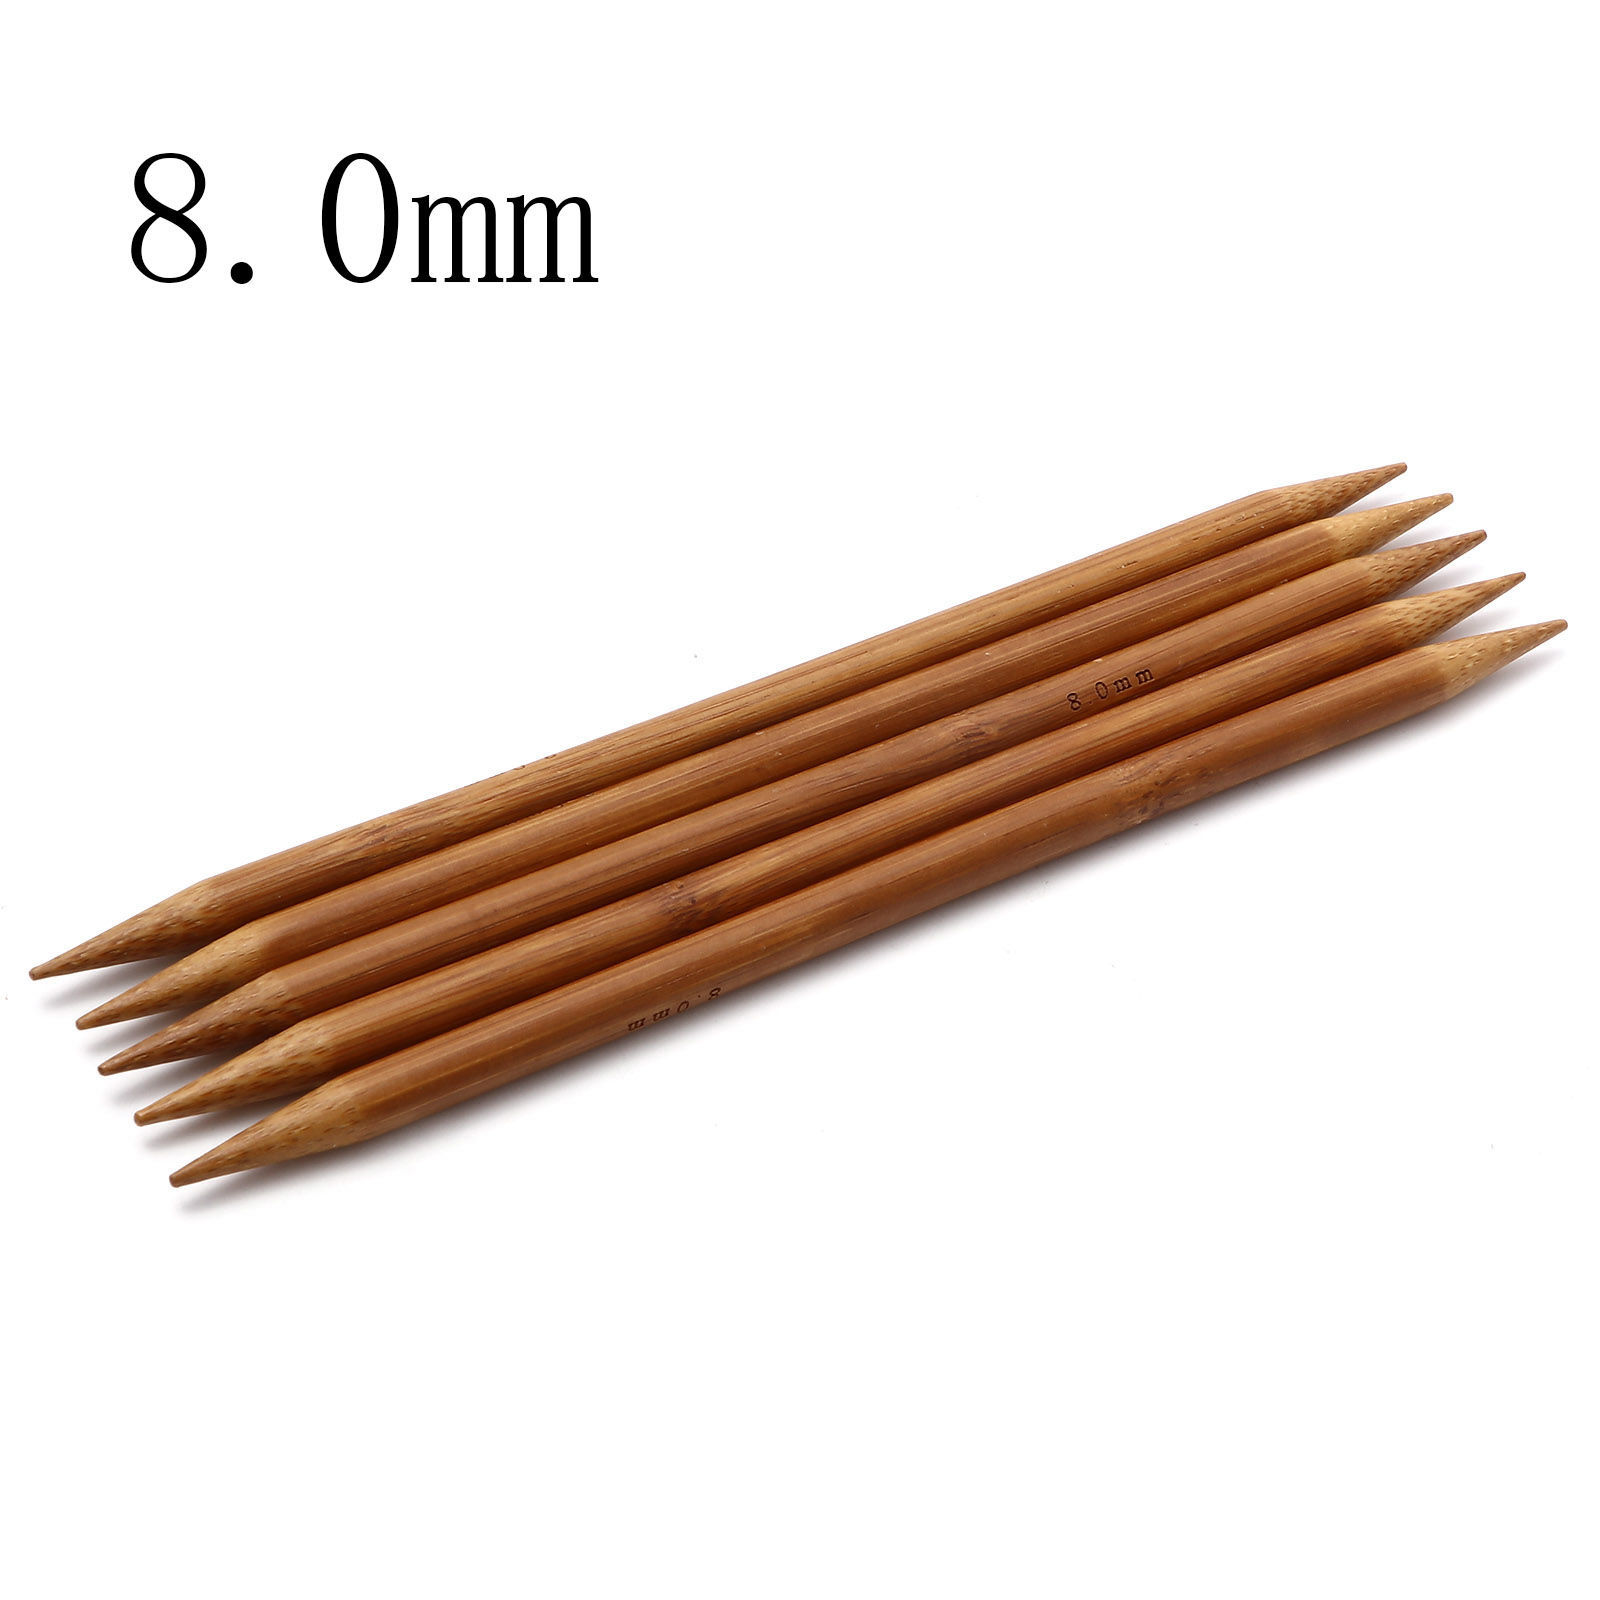 Picture of (US11 8.0mm) Bamboo Double Pointed Knitting Needles Brown 20cm(7 7/8") long, 5 PCs